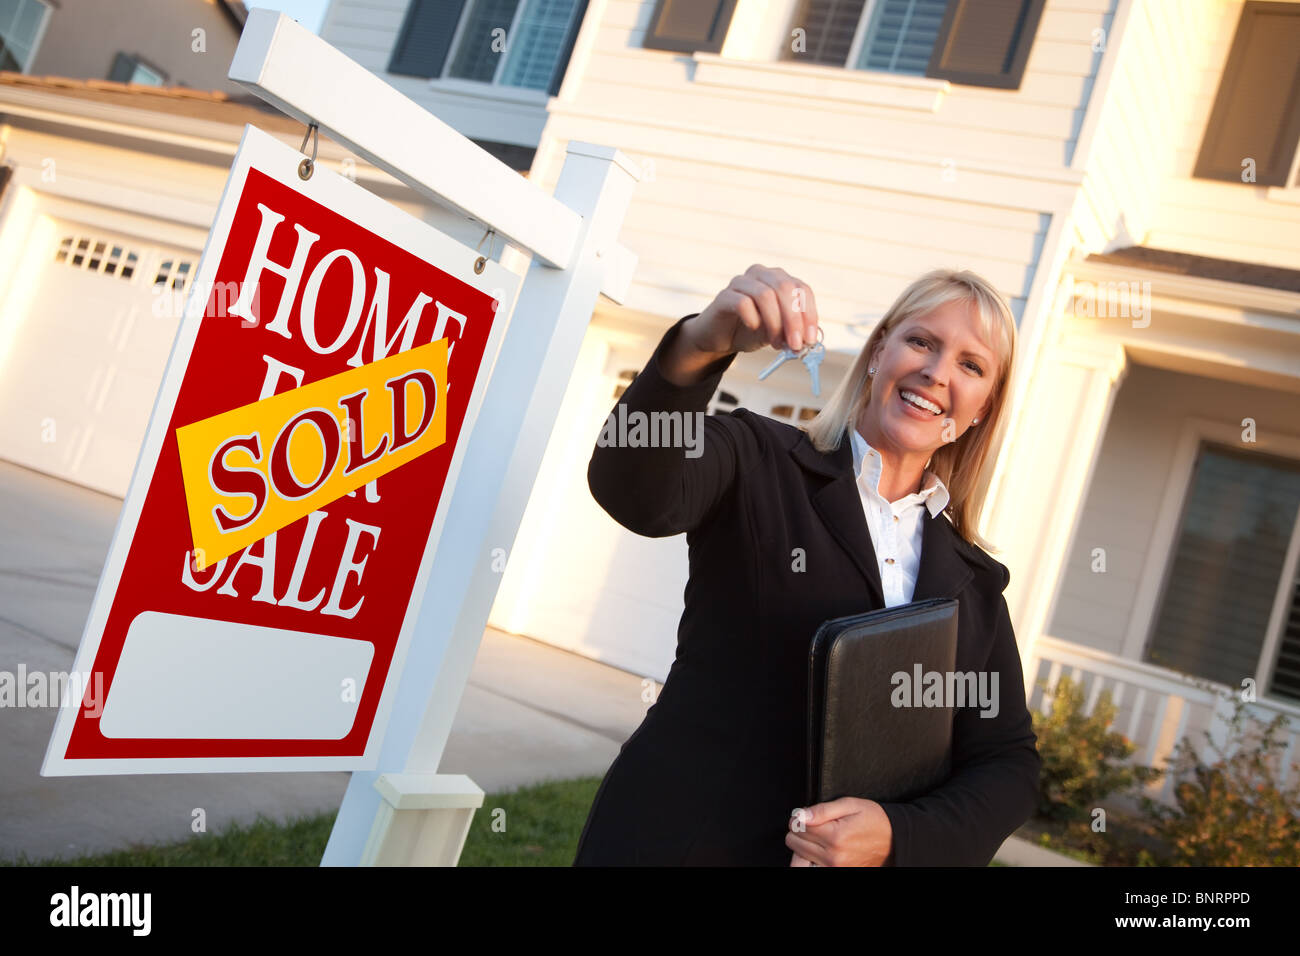 Female Real Estate Agent Handing Over the House Keys in Front of a Beautiful New Home and Real Estate Sign. Stock Photo